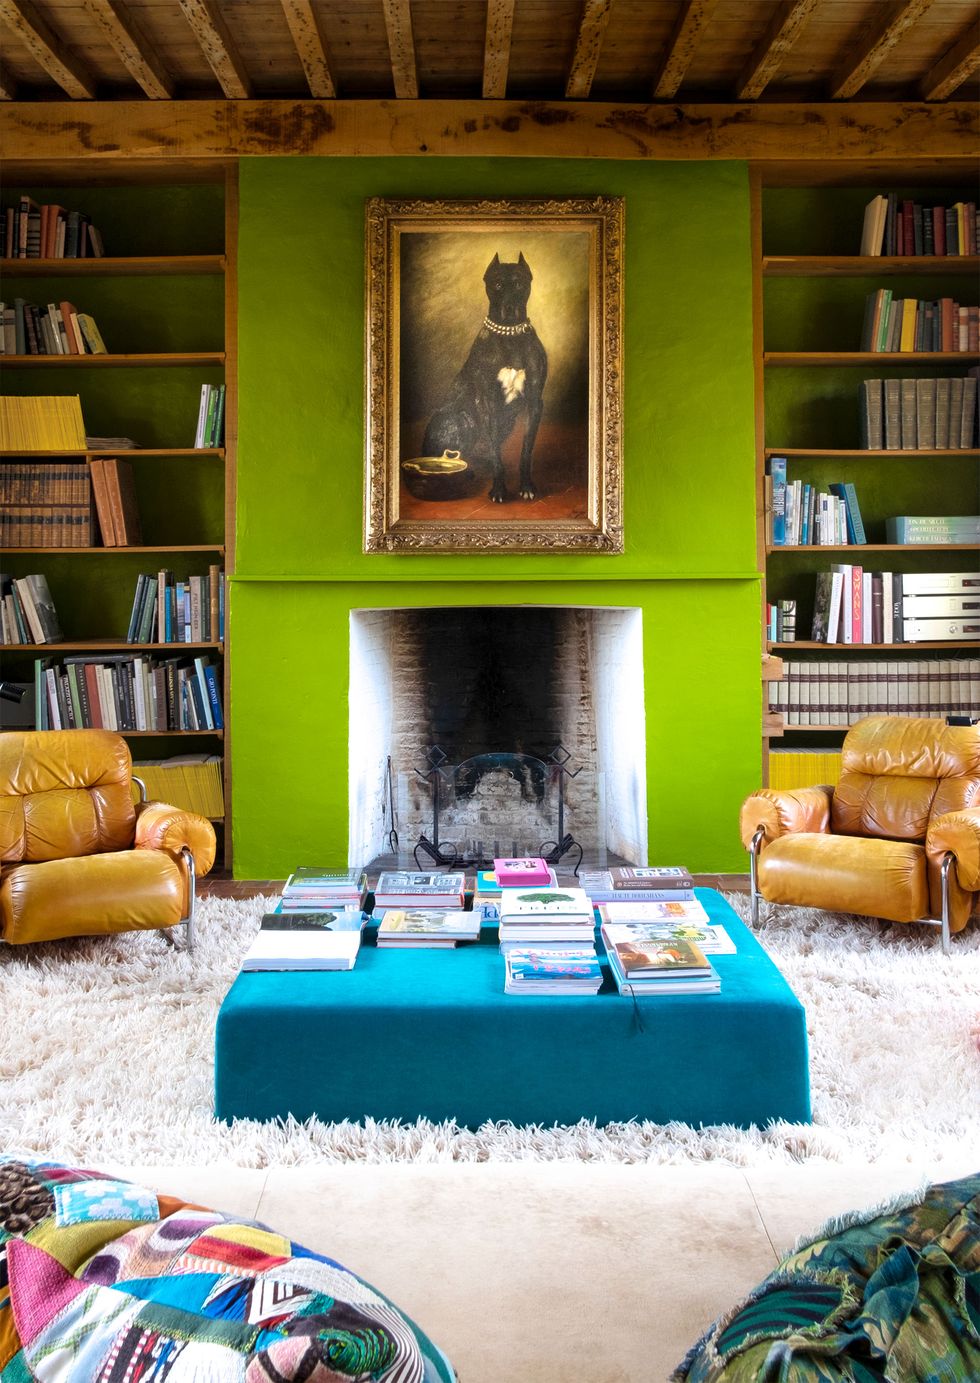 bright green mantel at center with yellow chairs to each side and a low square blue table in front and a very shaggy white rug underneath the furniture